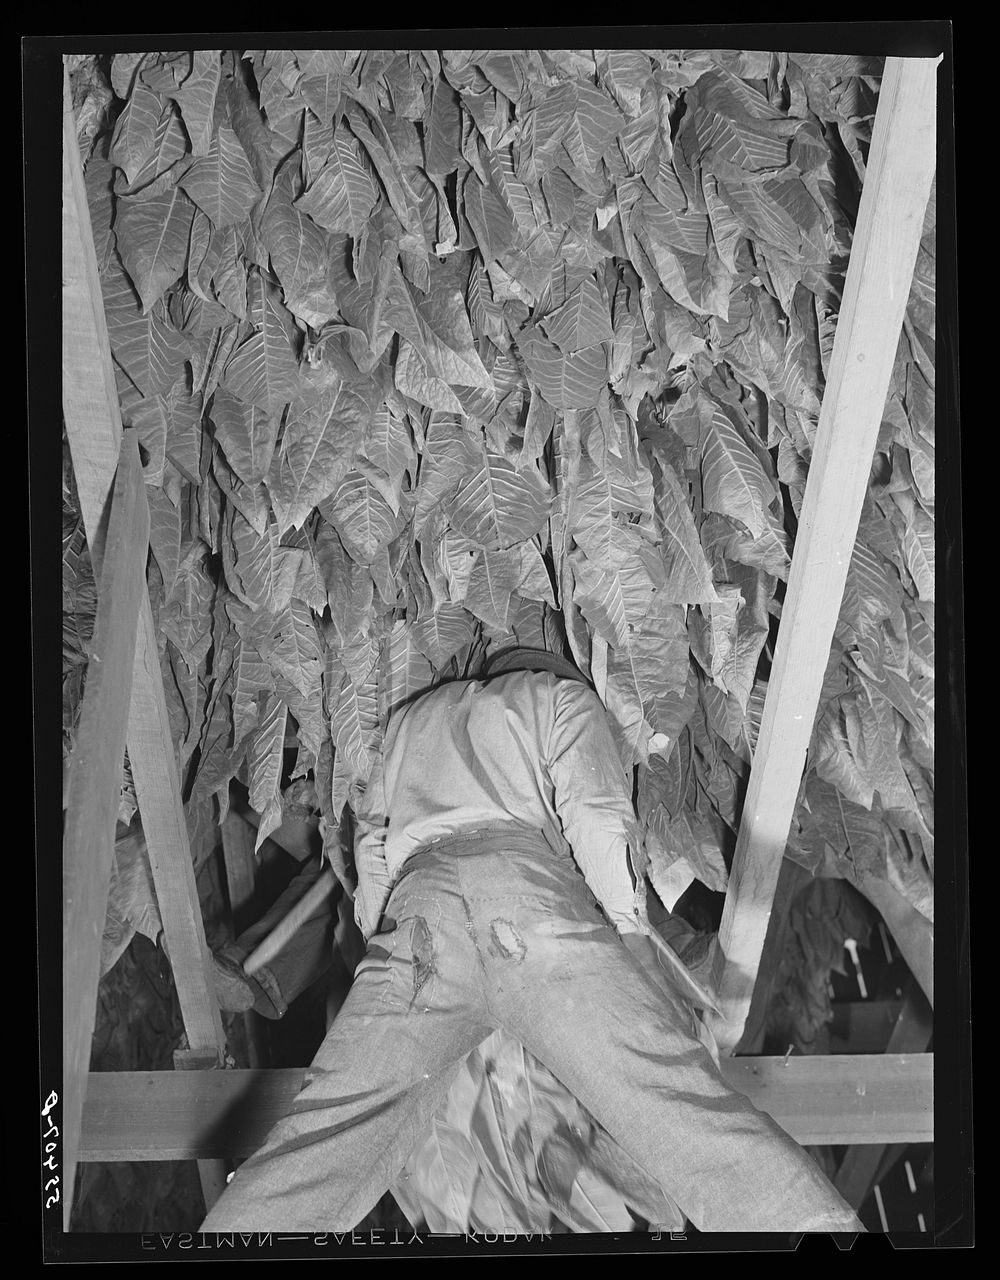 Hanging burley tobacco in the barn to dry and cure. On Russell Spear's farm near Lexington, Kentucky. Sourced from the…